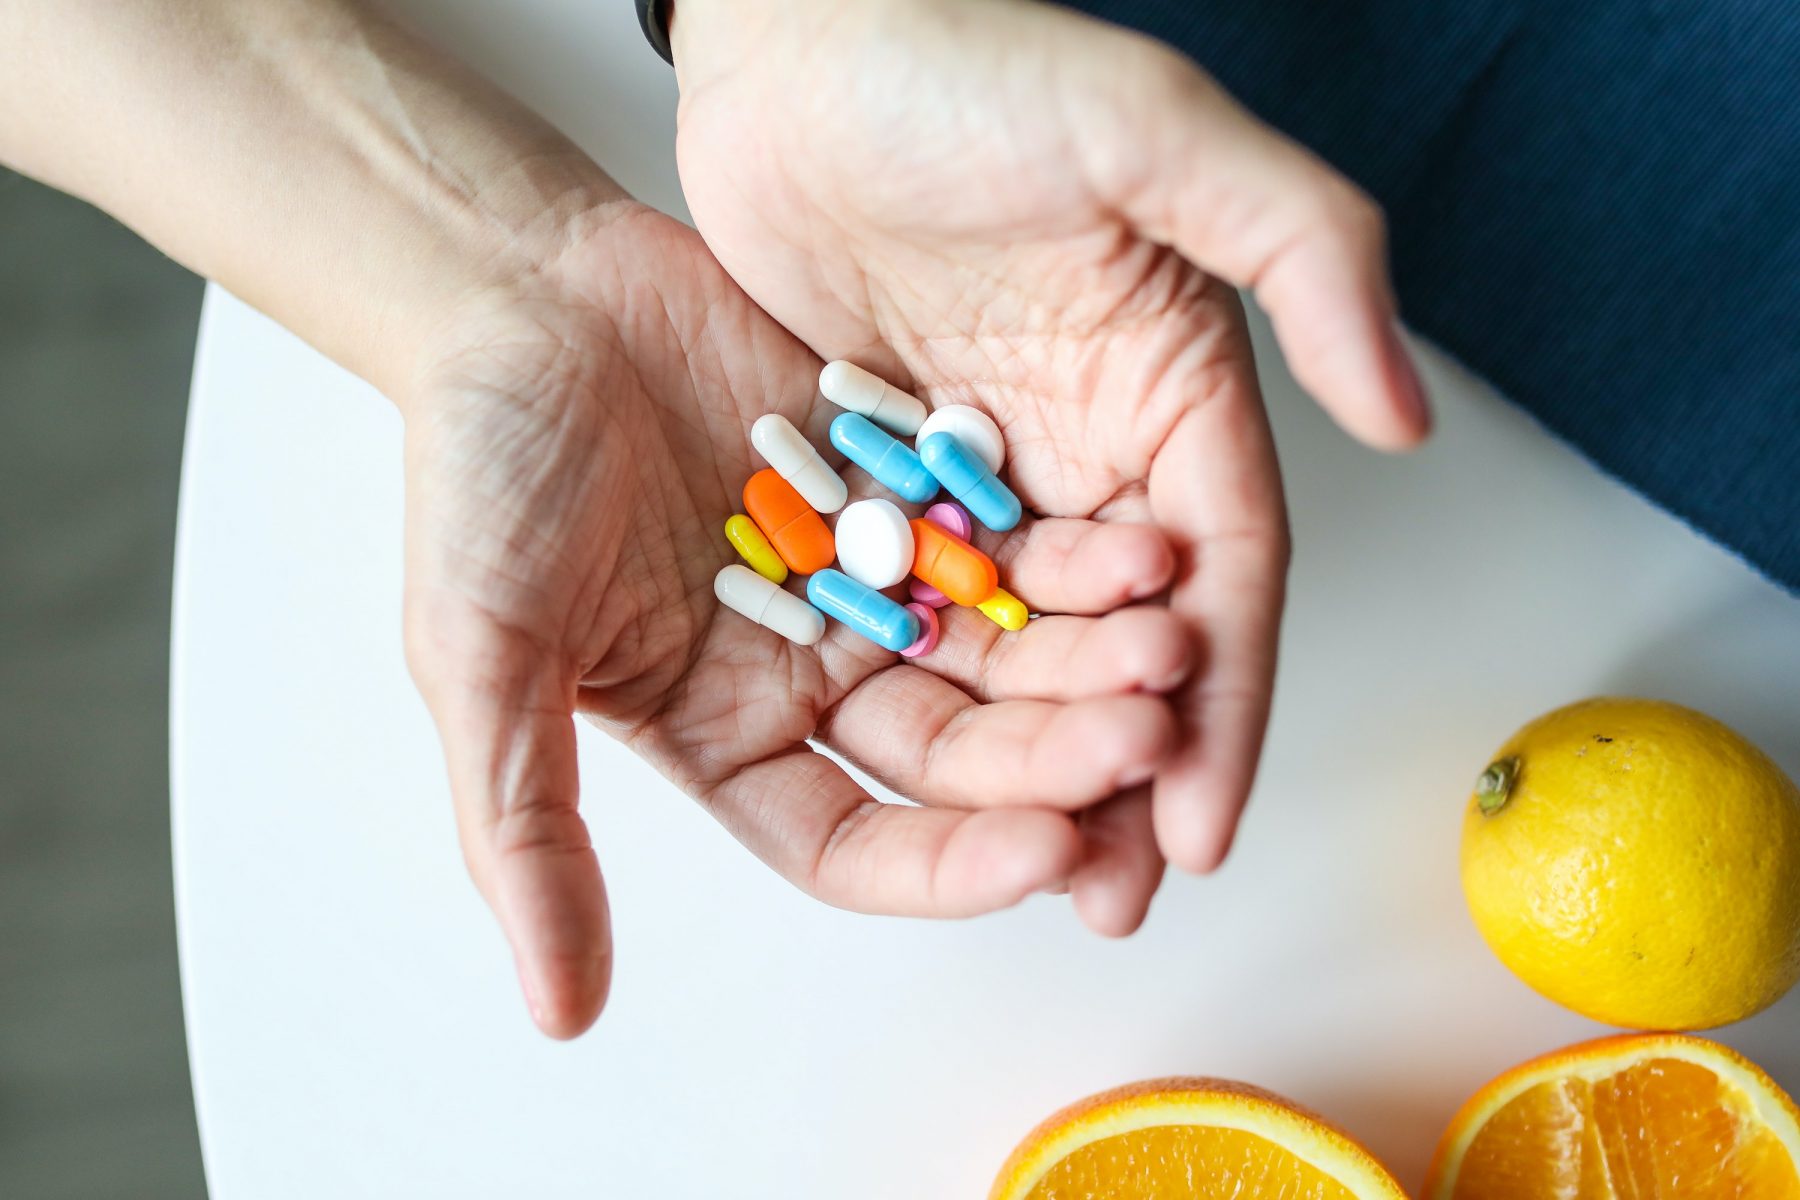 A bunch of colorful pills in the palms of a person's hands, next to some lemons.